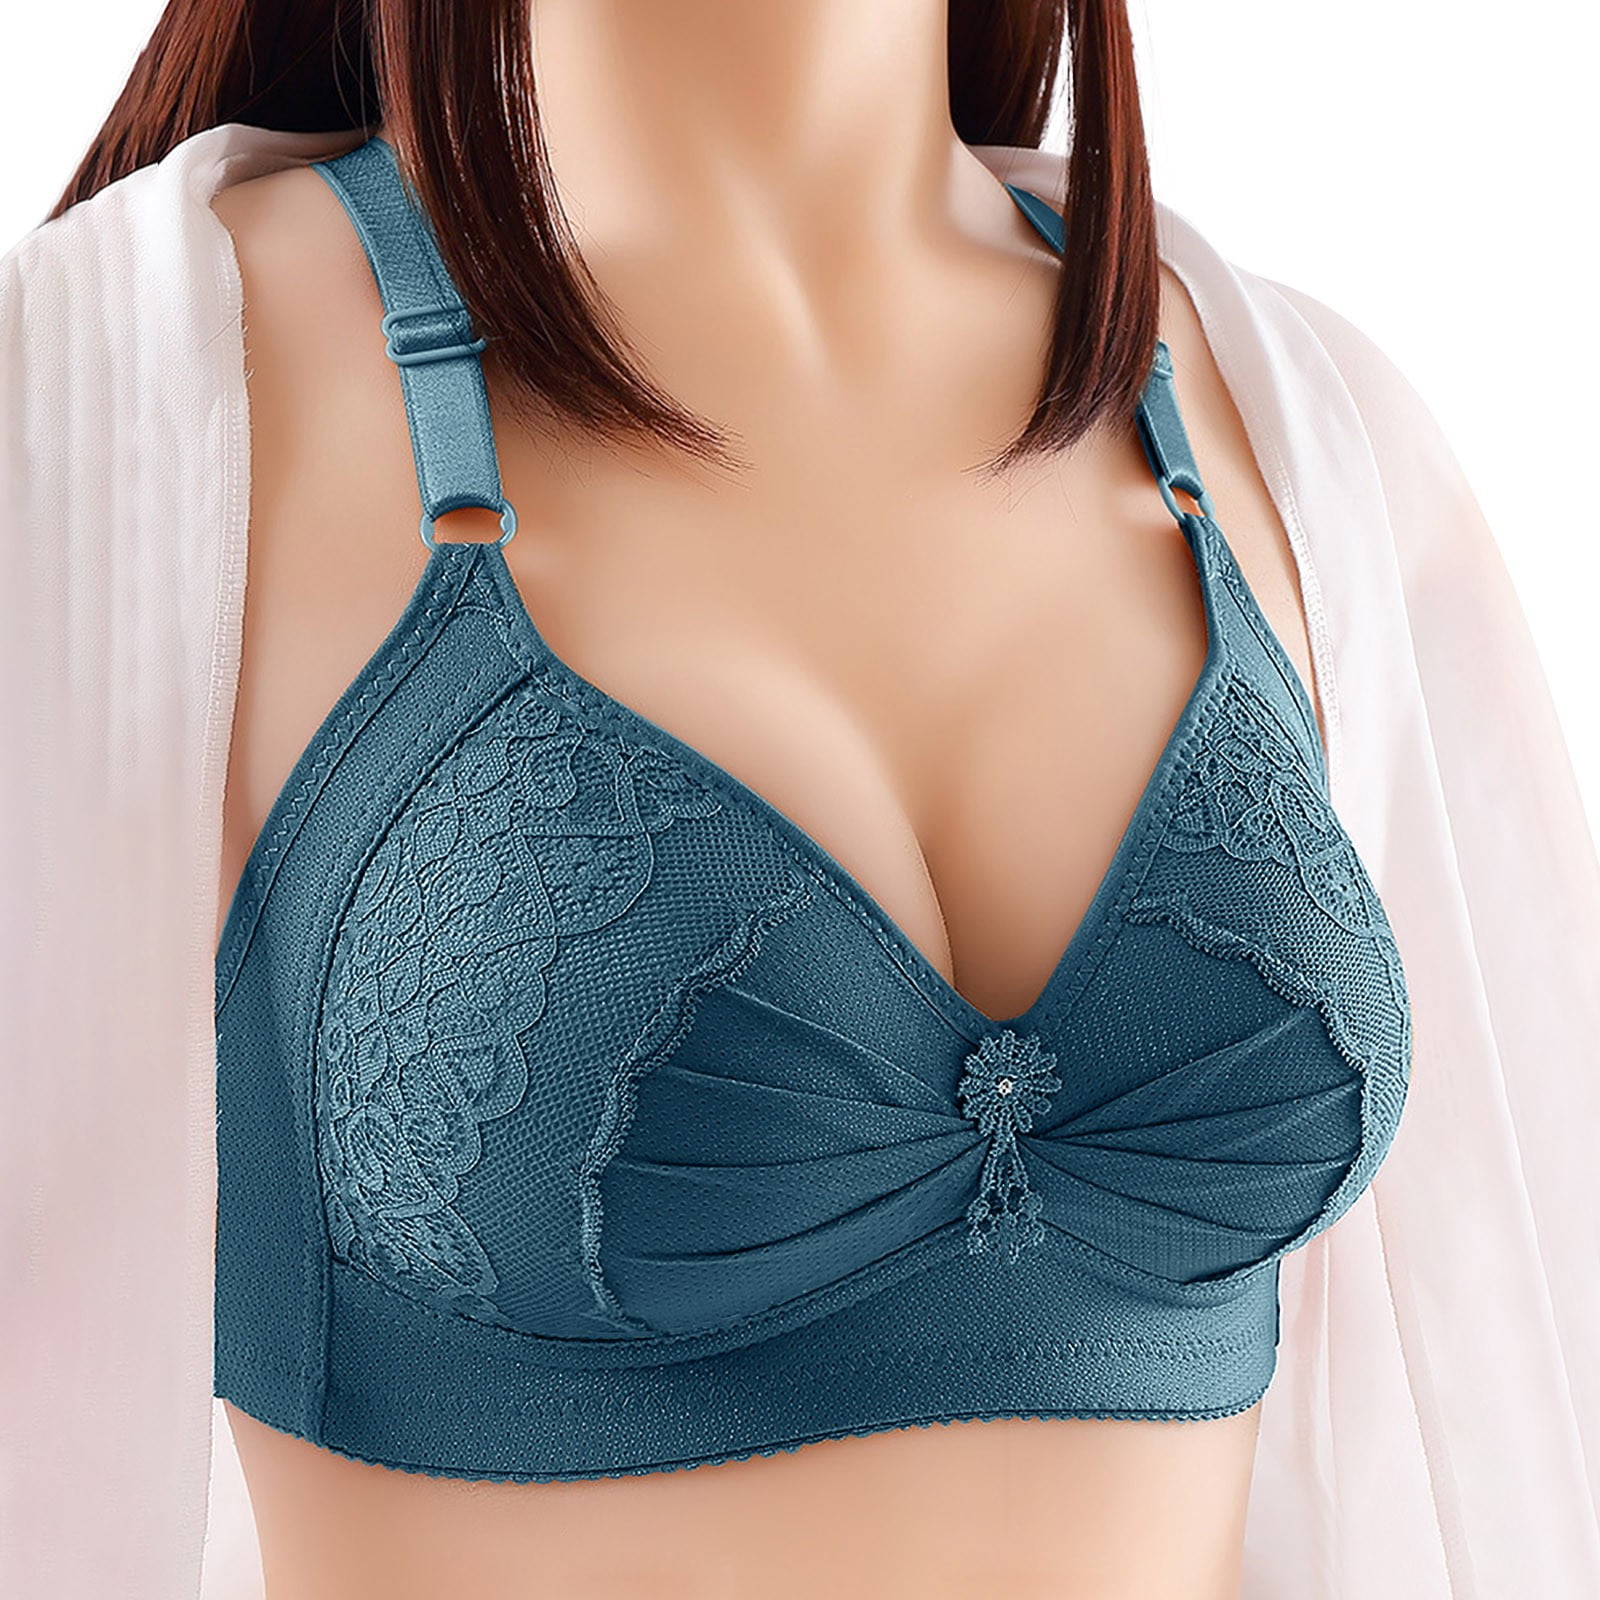 LEEy-World Bras for Women Comfort Devotion Lace Bra, Wirefree Bra with Full  Coverage, Push-Up Bra with Natural Lift, Comfortable Bra Navy,M